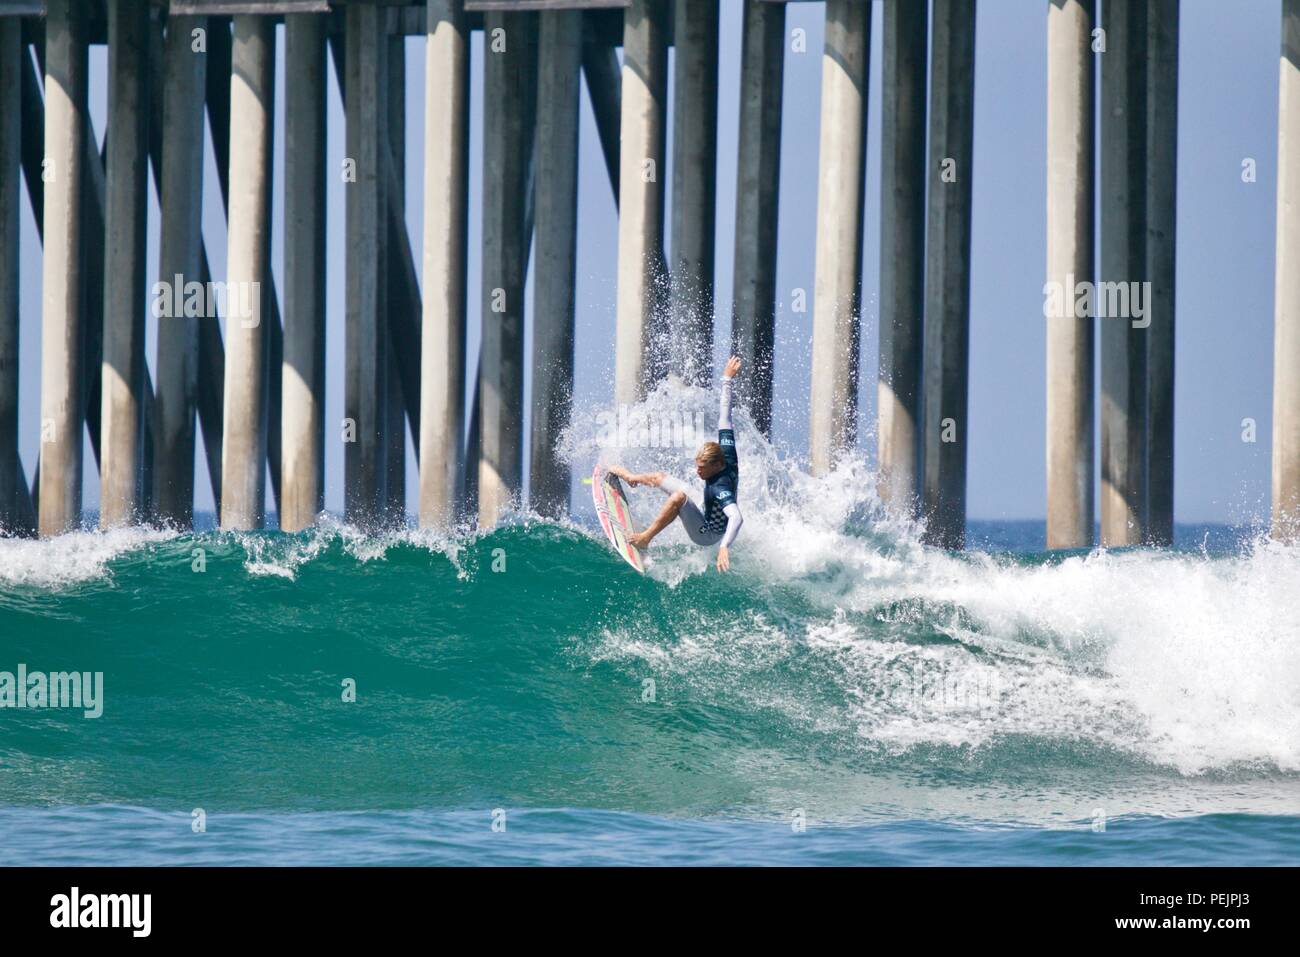 Kolohe Andino competing in the US Open of Surfing 2018 Stock Photo